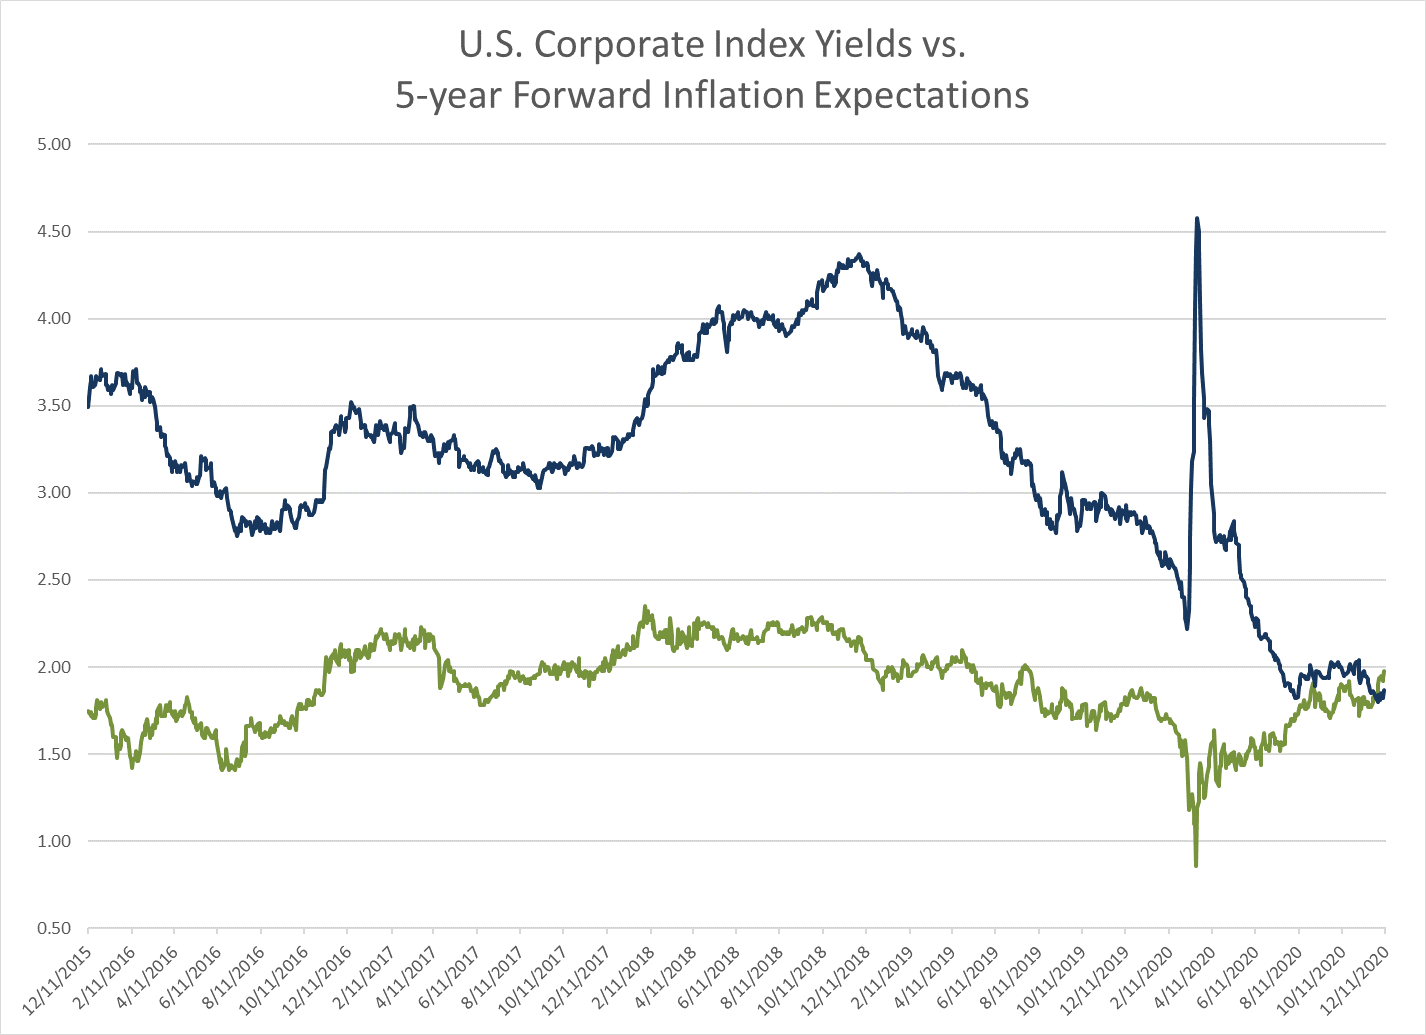 Yields vs. Inflation Expectations